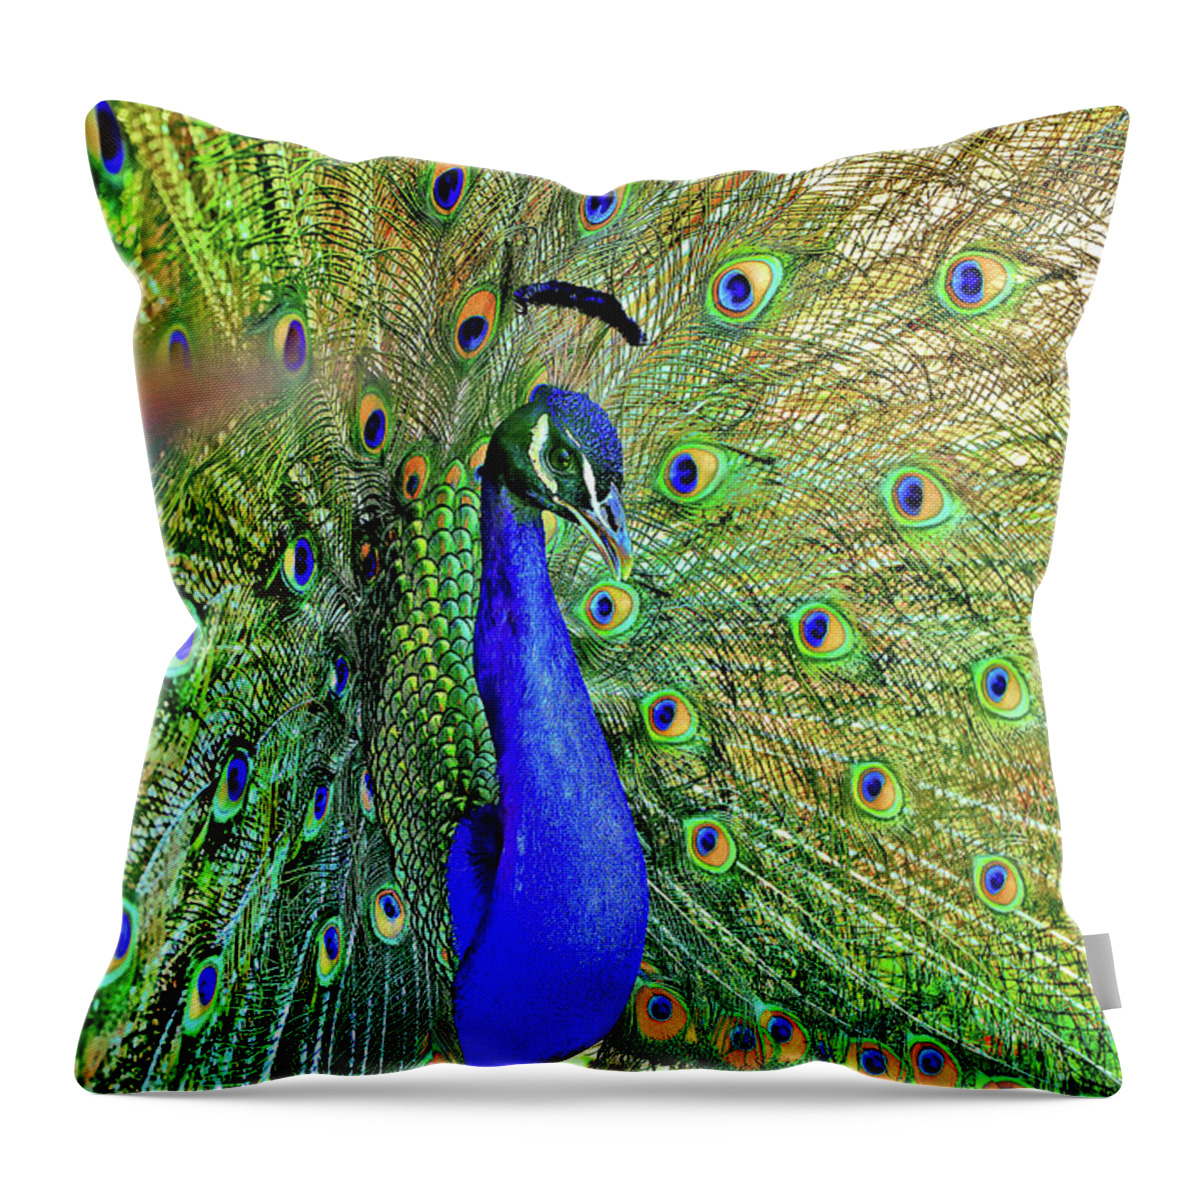 Peacock Feathers Throw Pillow featuring the photograph The Prince by Az Jackson